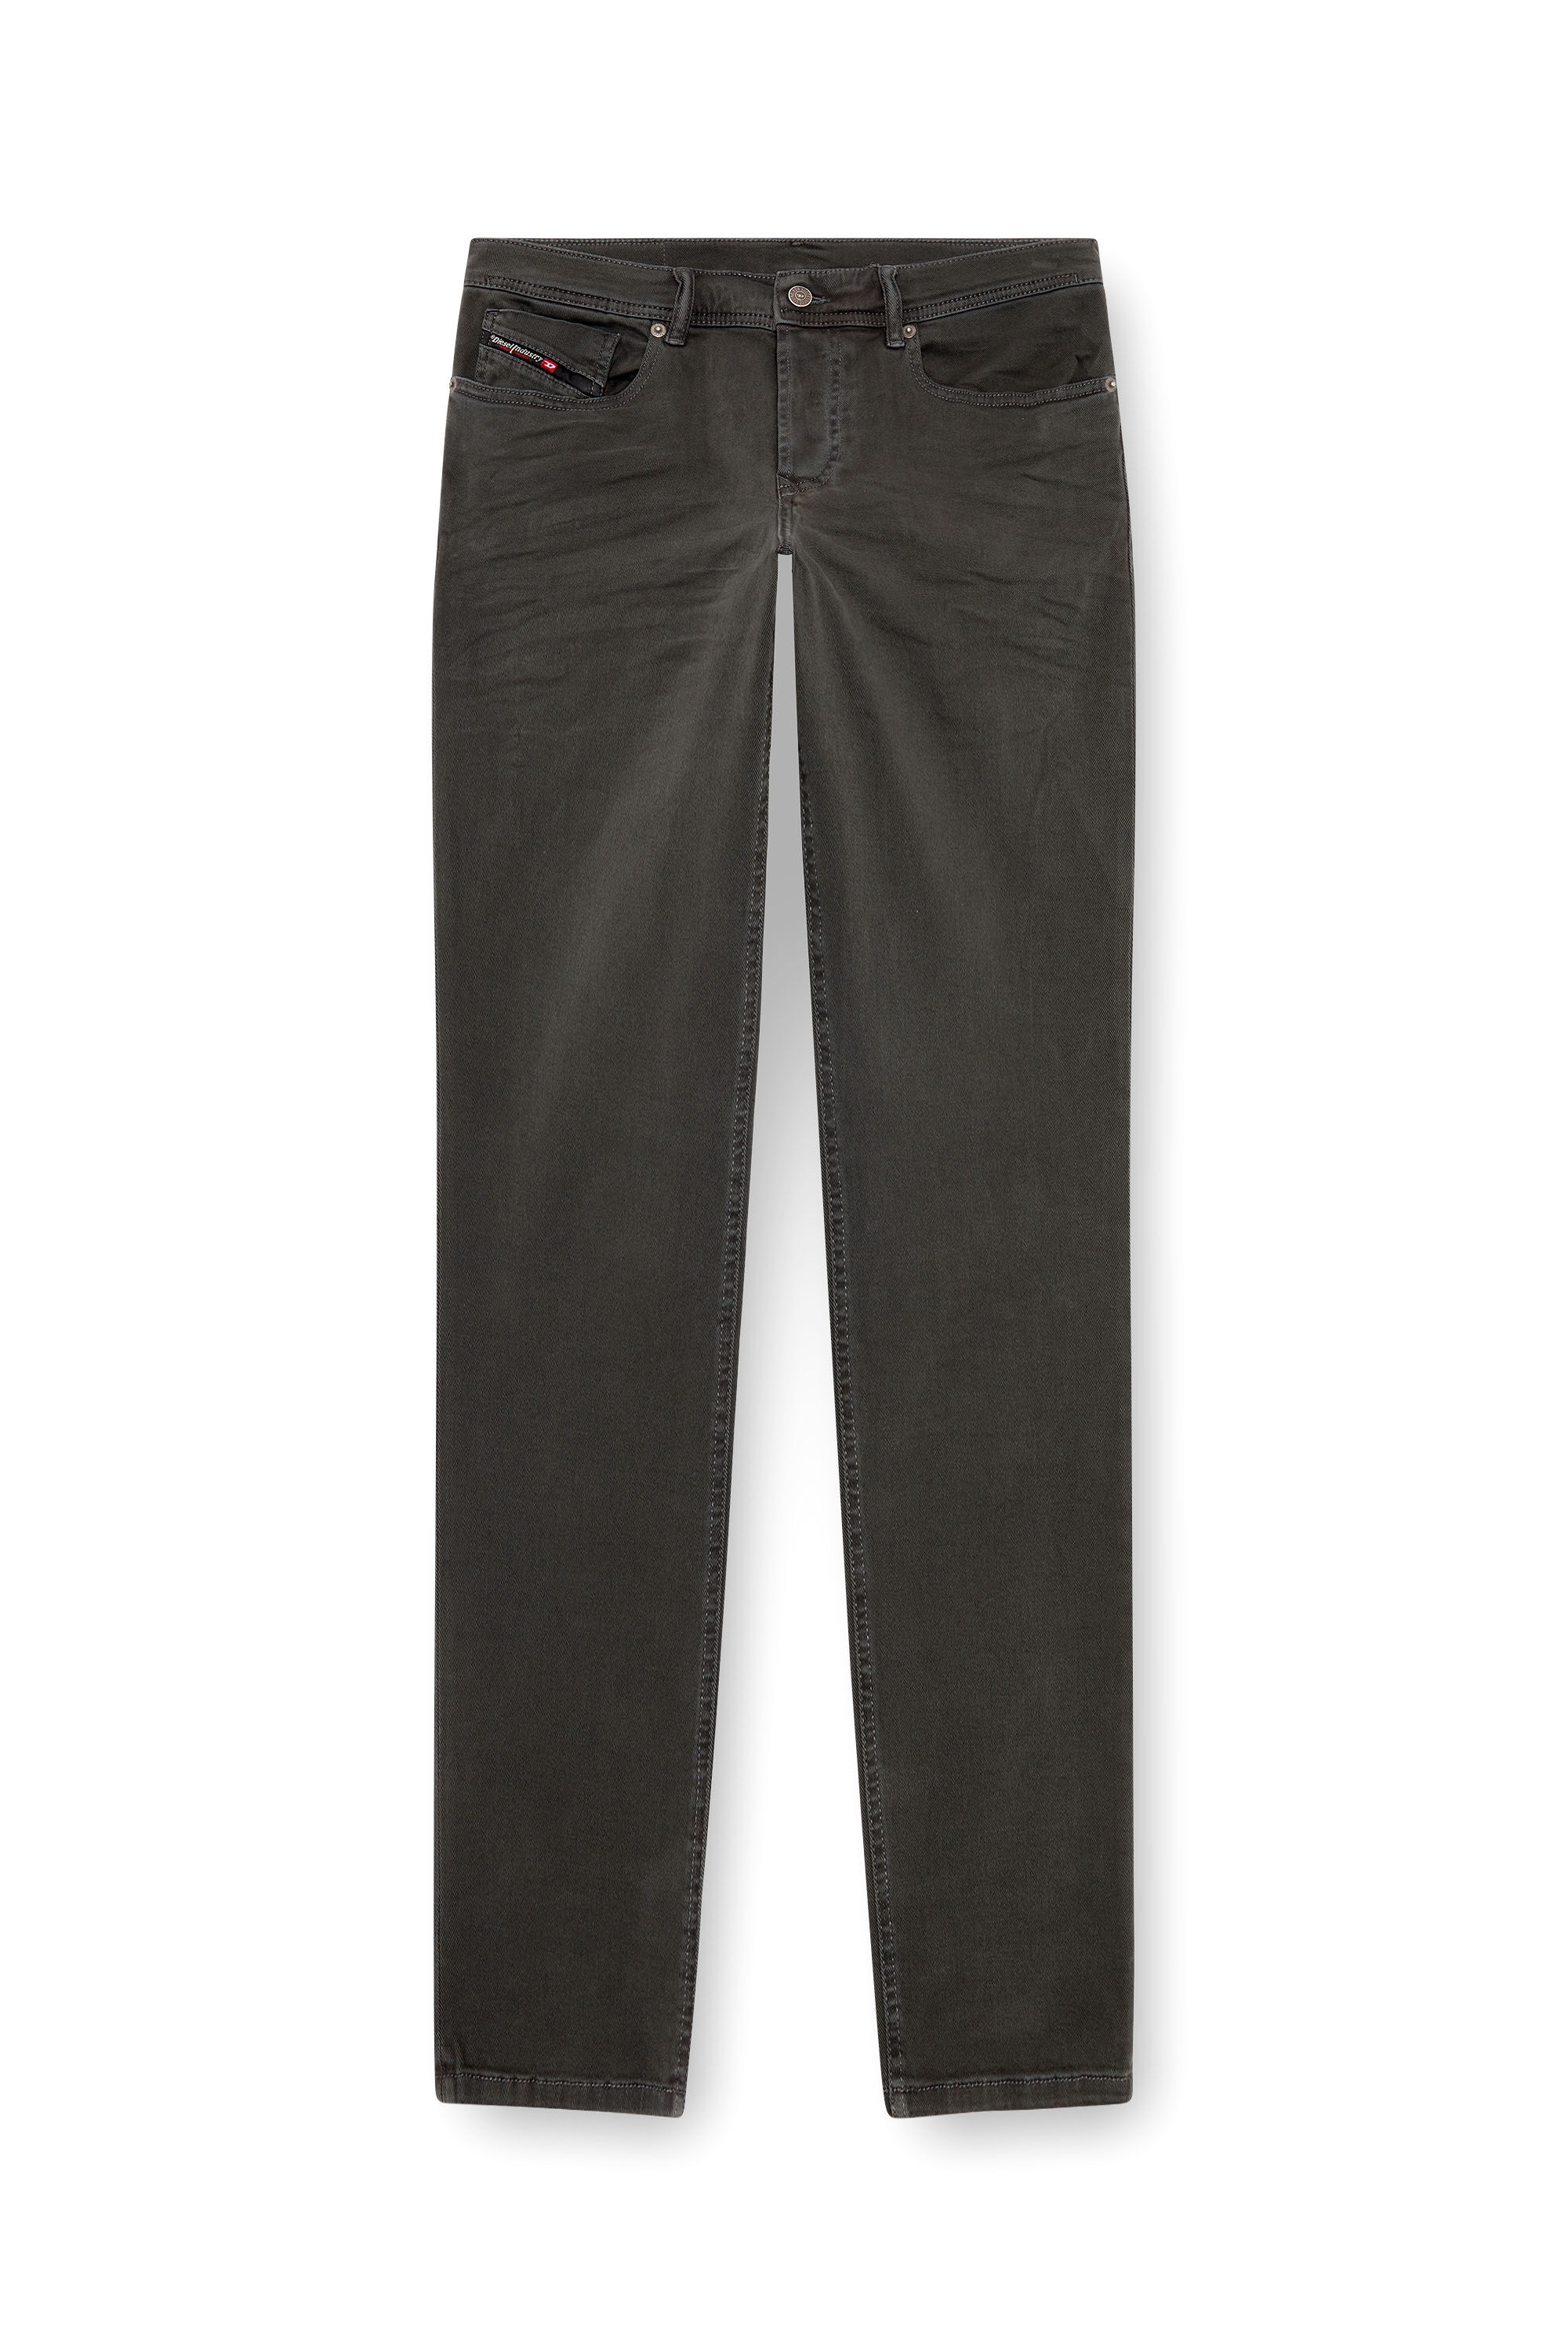 Diesel - Tapered Jeans 2023 D-Finitive 0QWTY, Hombre Tapered Jeans - 2023 D-Finitive in Gris - Image 2